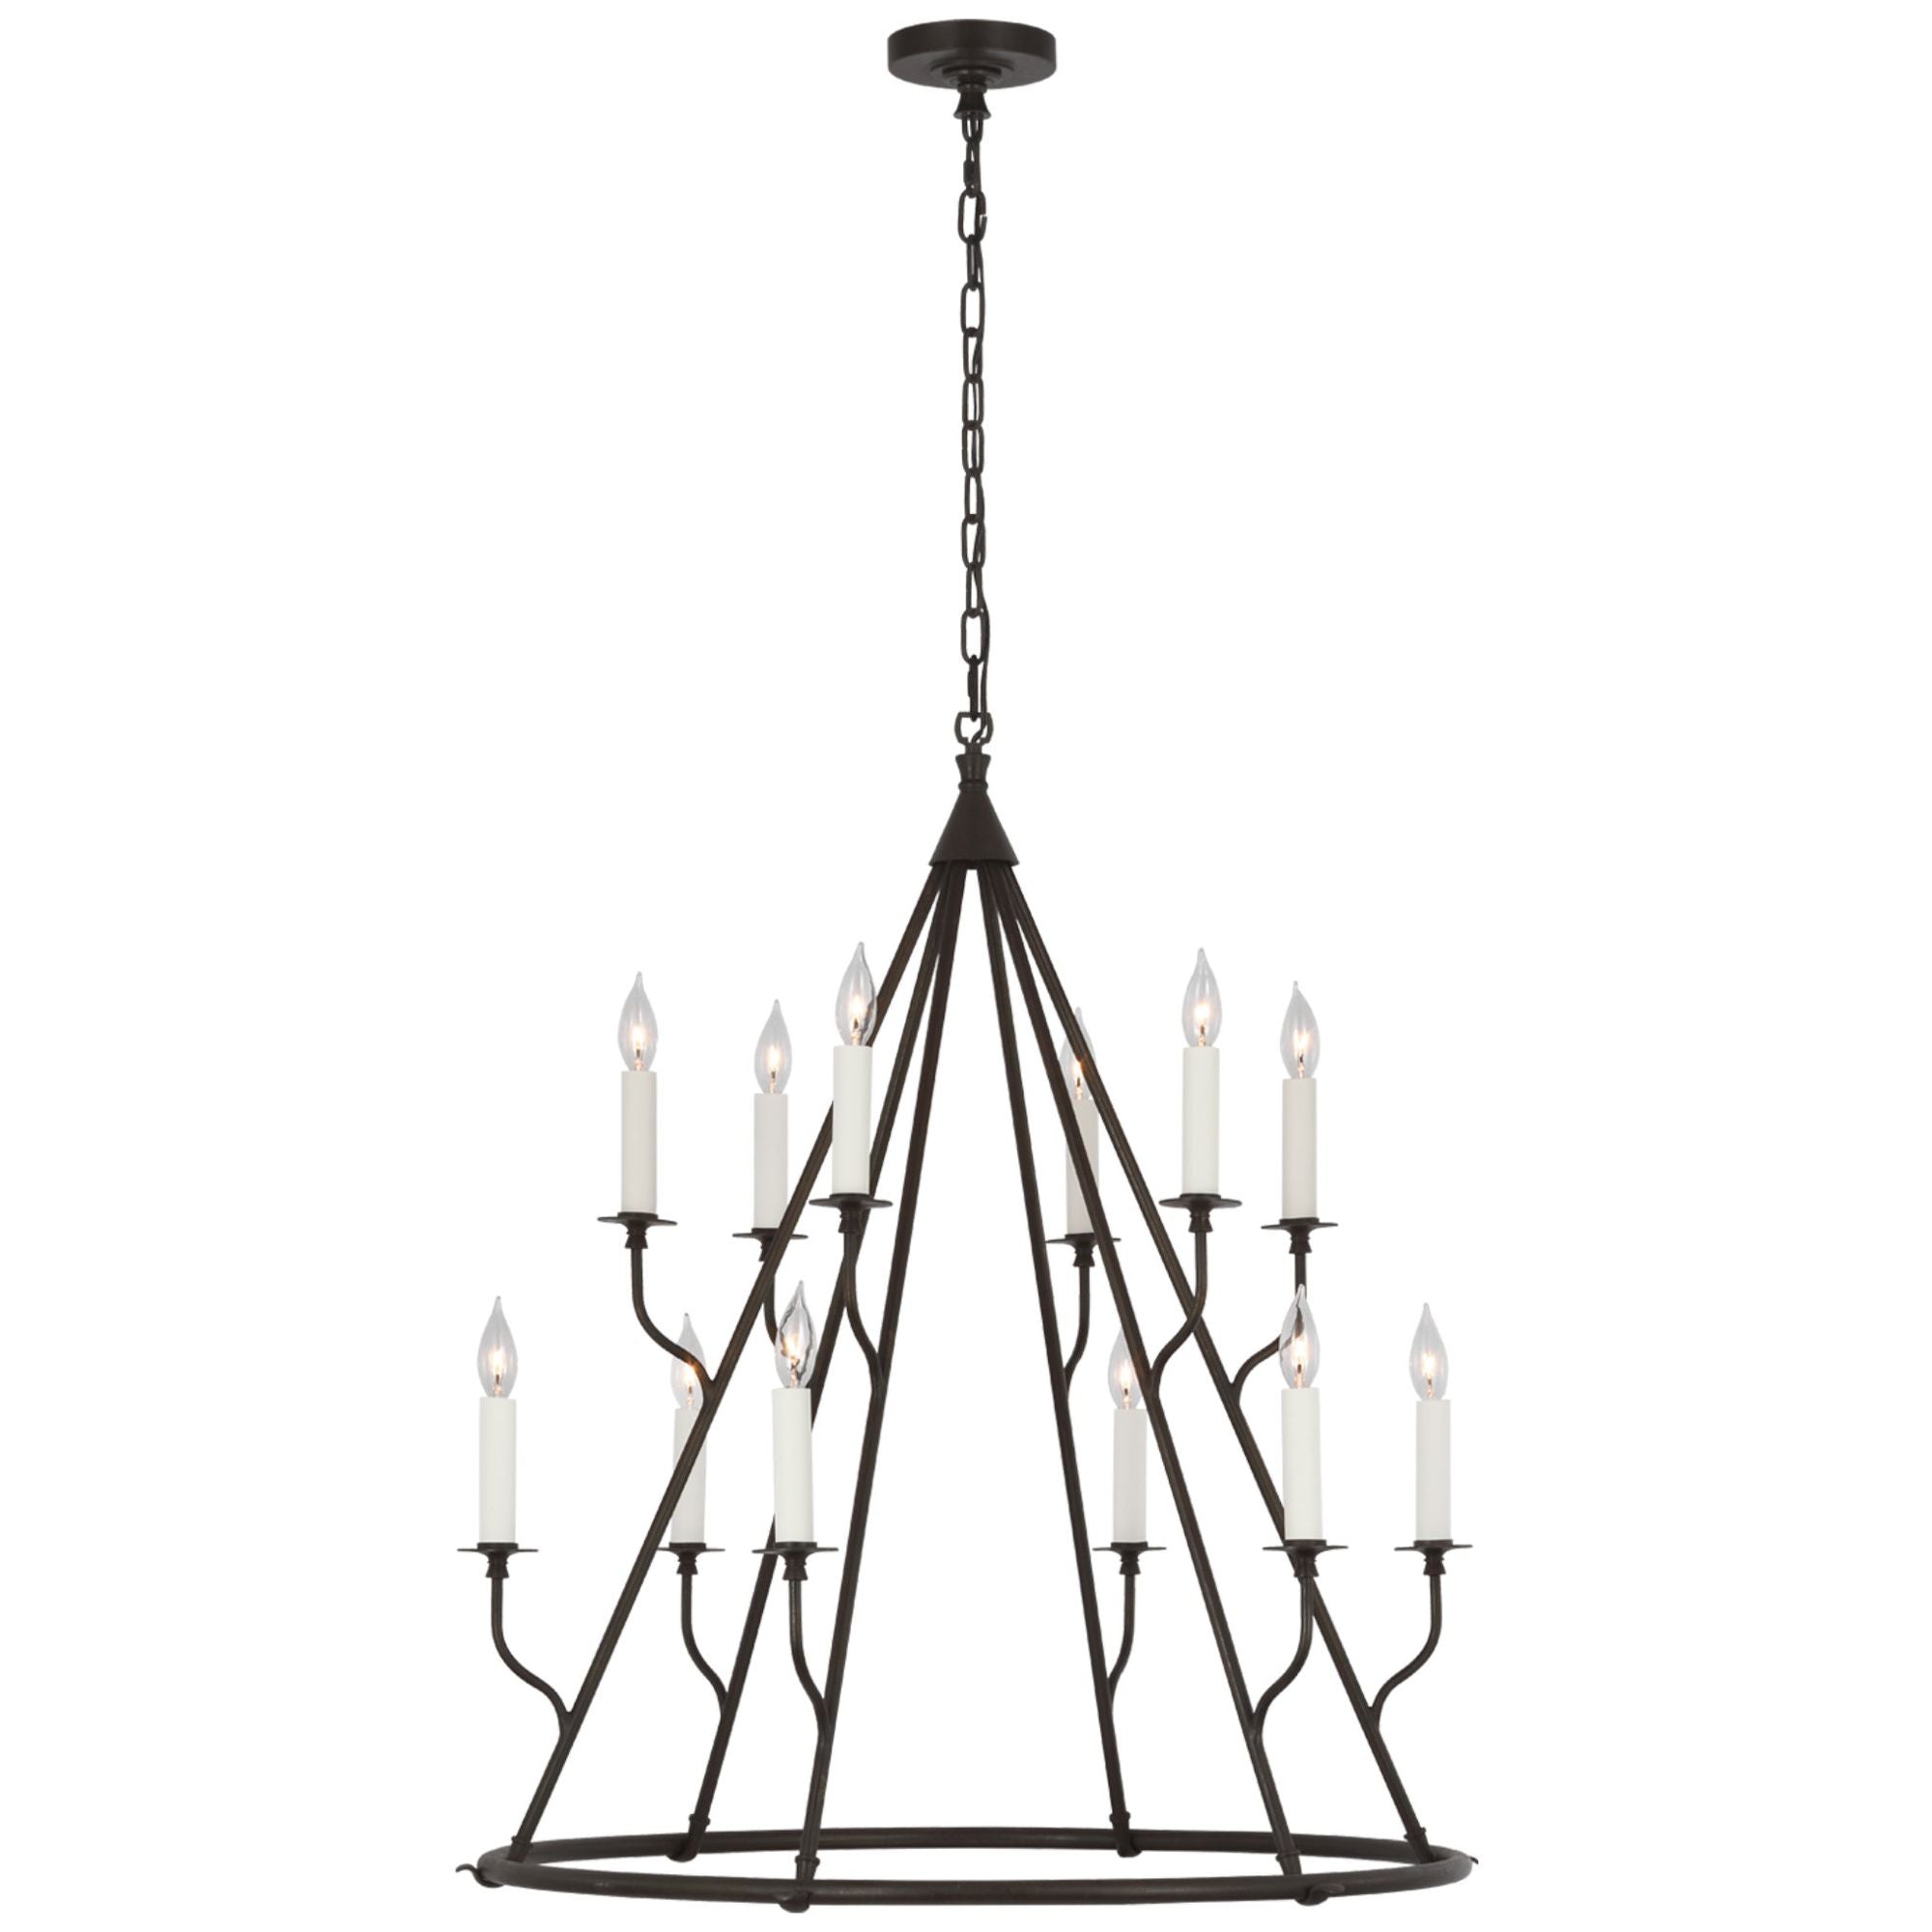 Julie Neill Lorio Large Chandelier in Aged Iron